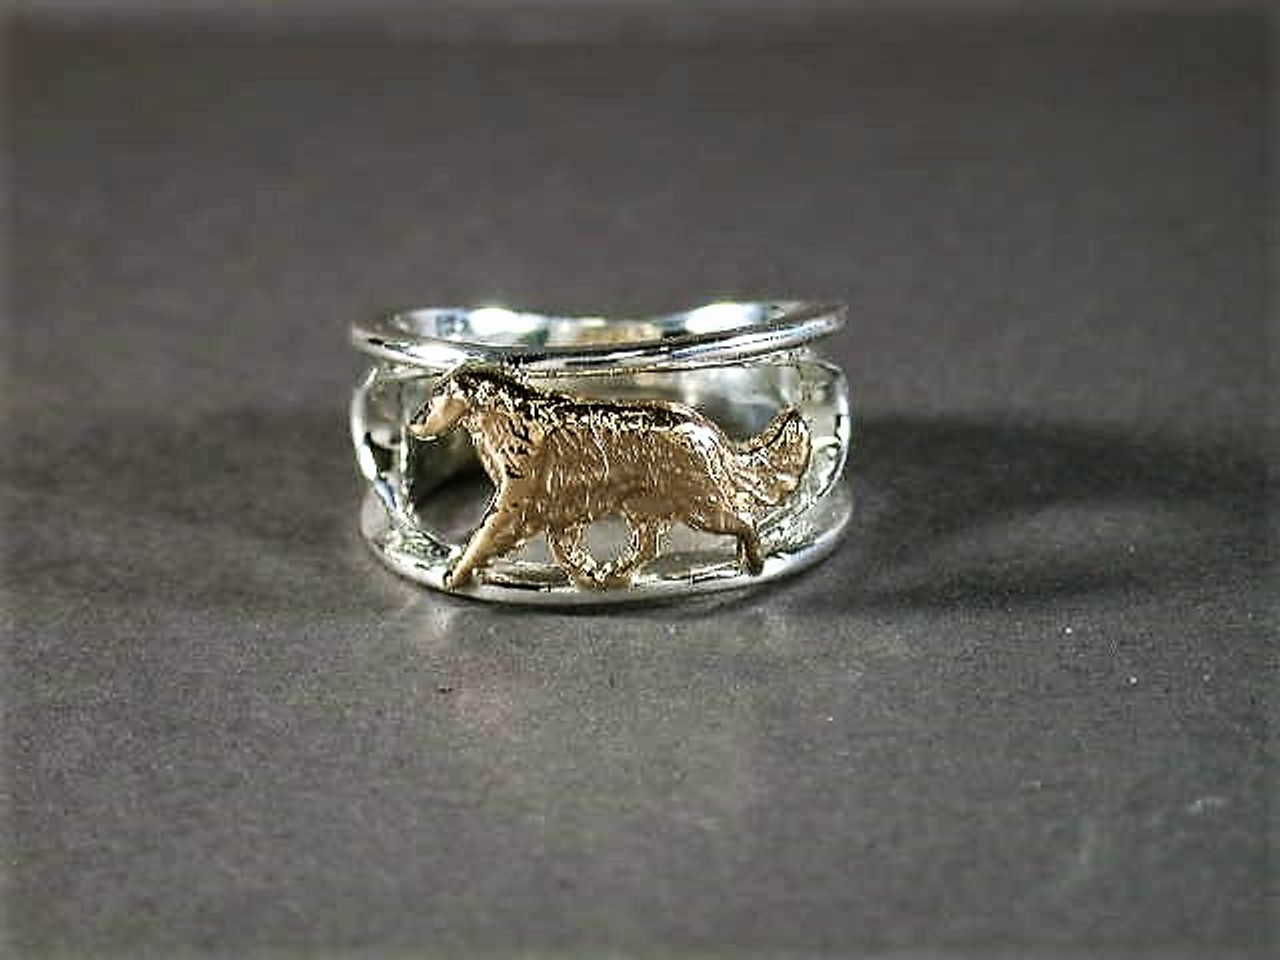 Ring Insert With Borzoi